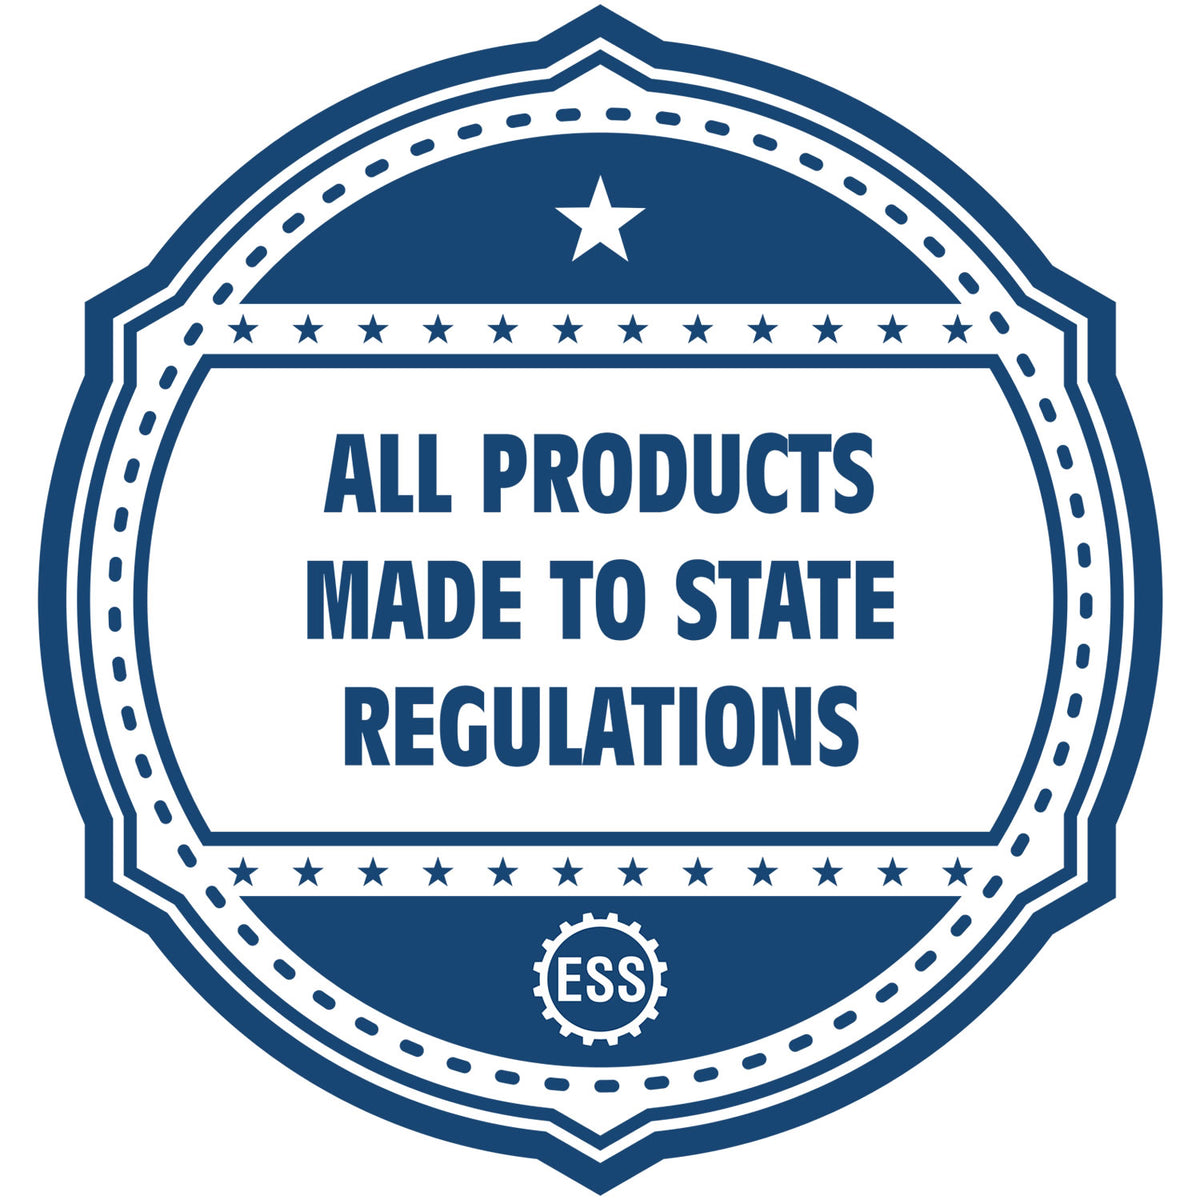 An icon or badge element for the Handheld Vermont Professional Engineer Embosser showing that this product is made in compliance with state regulations.